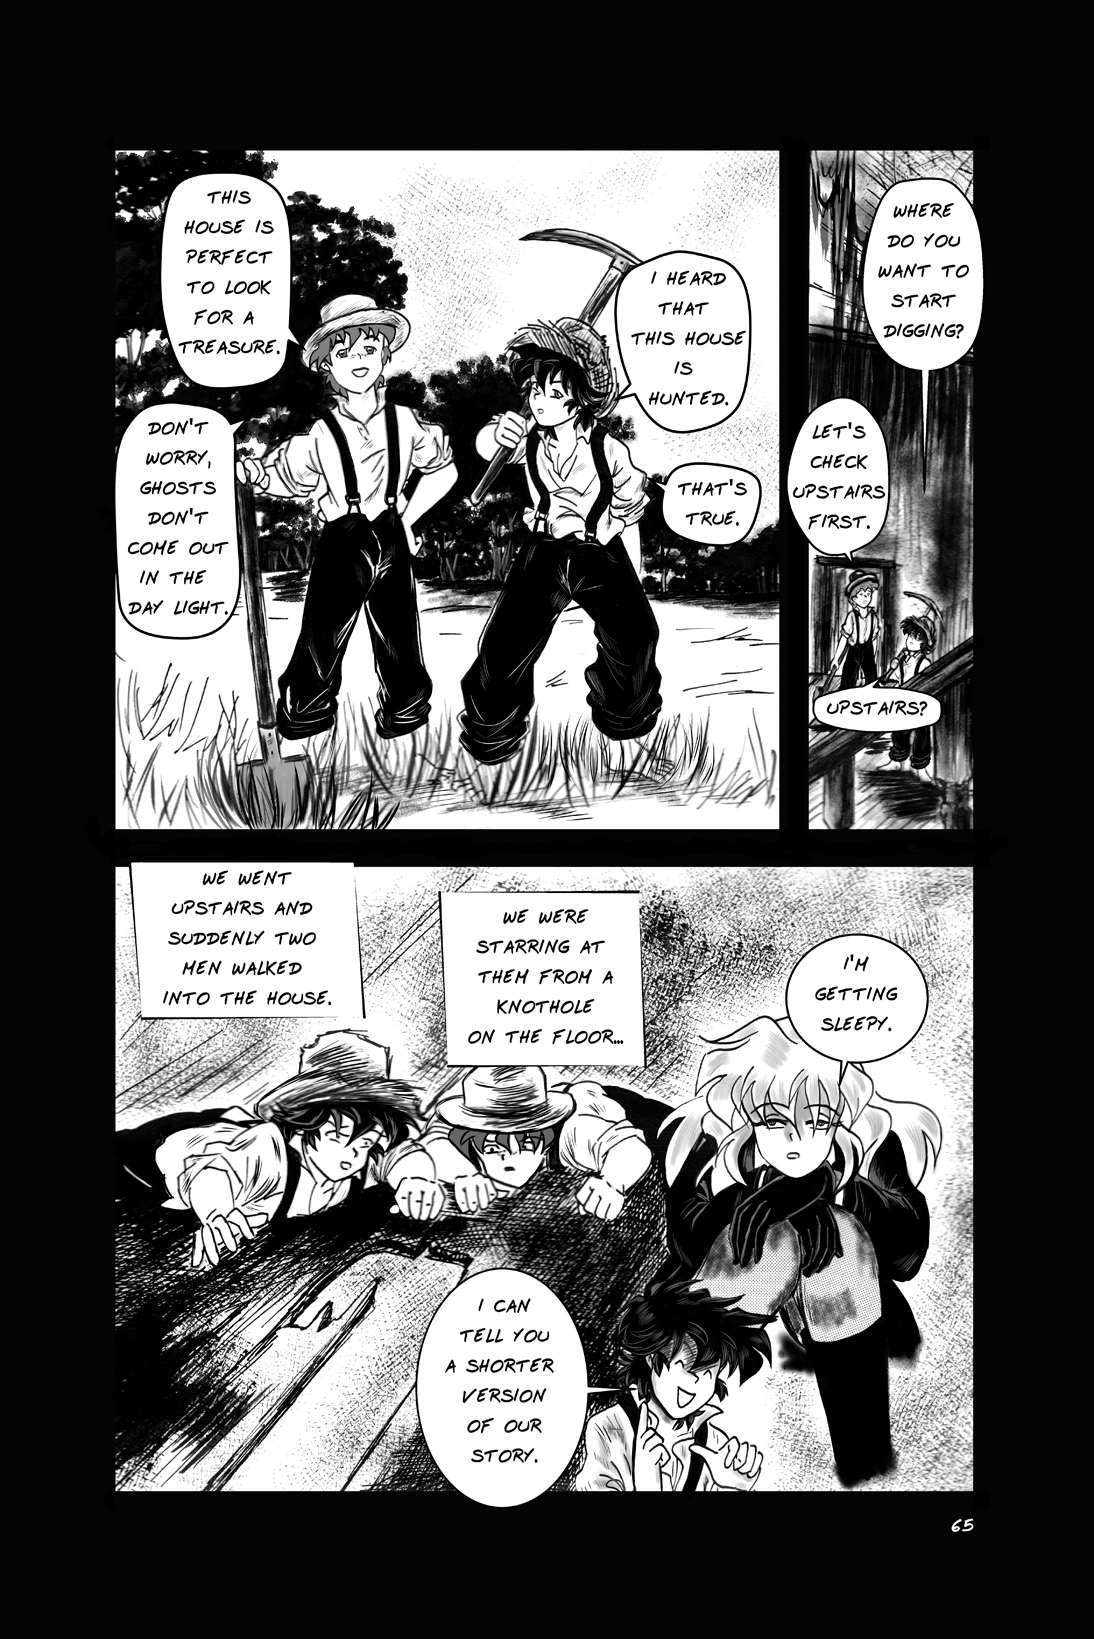 page65-Legends of the West